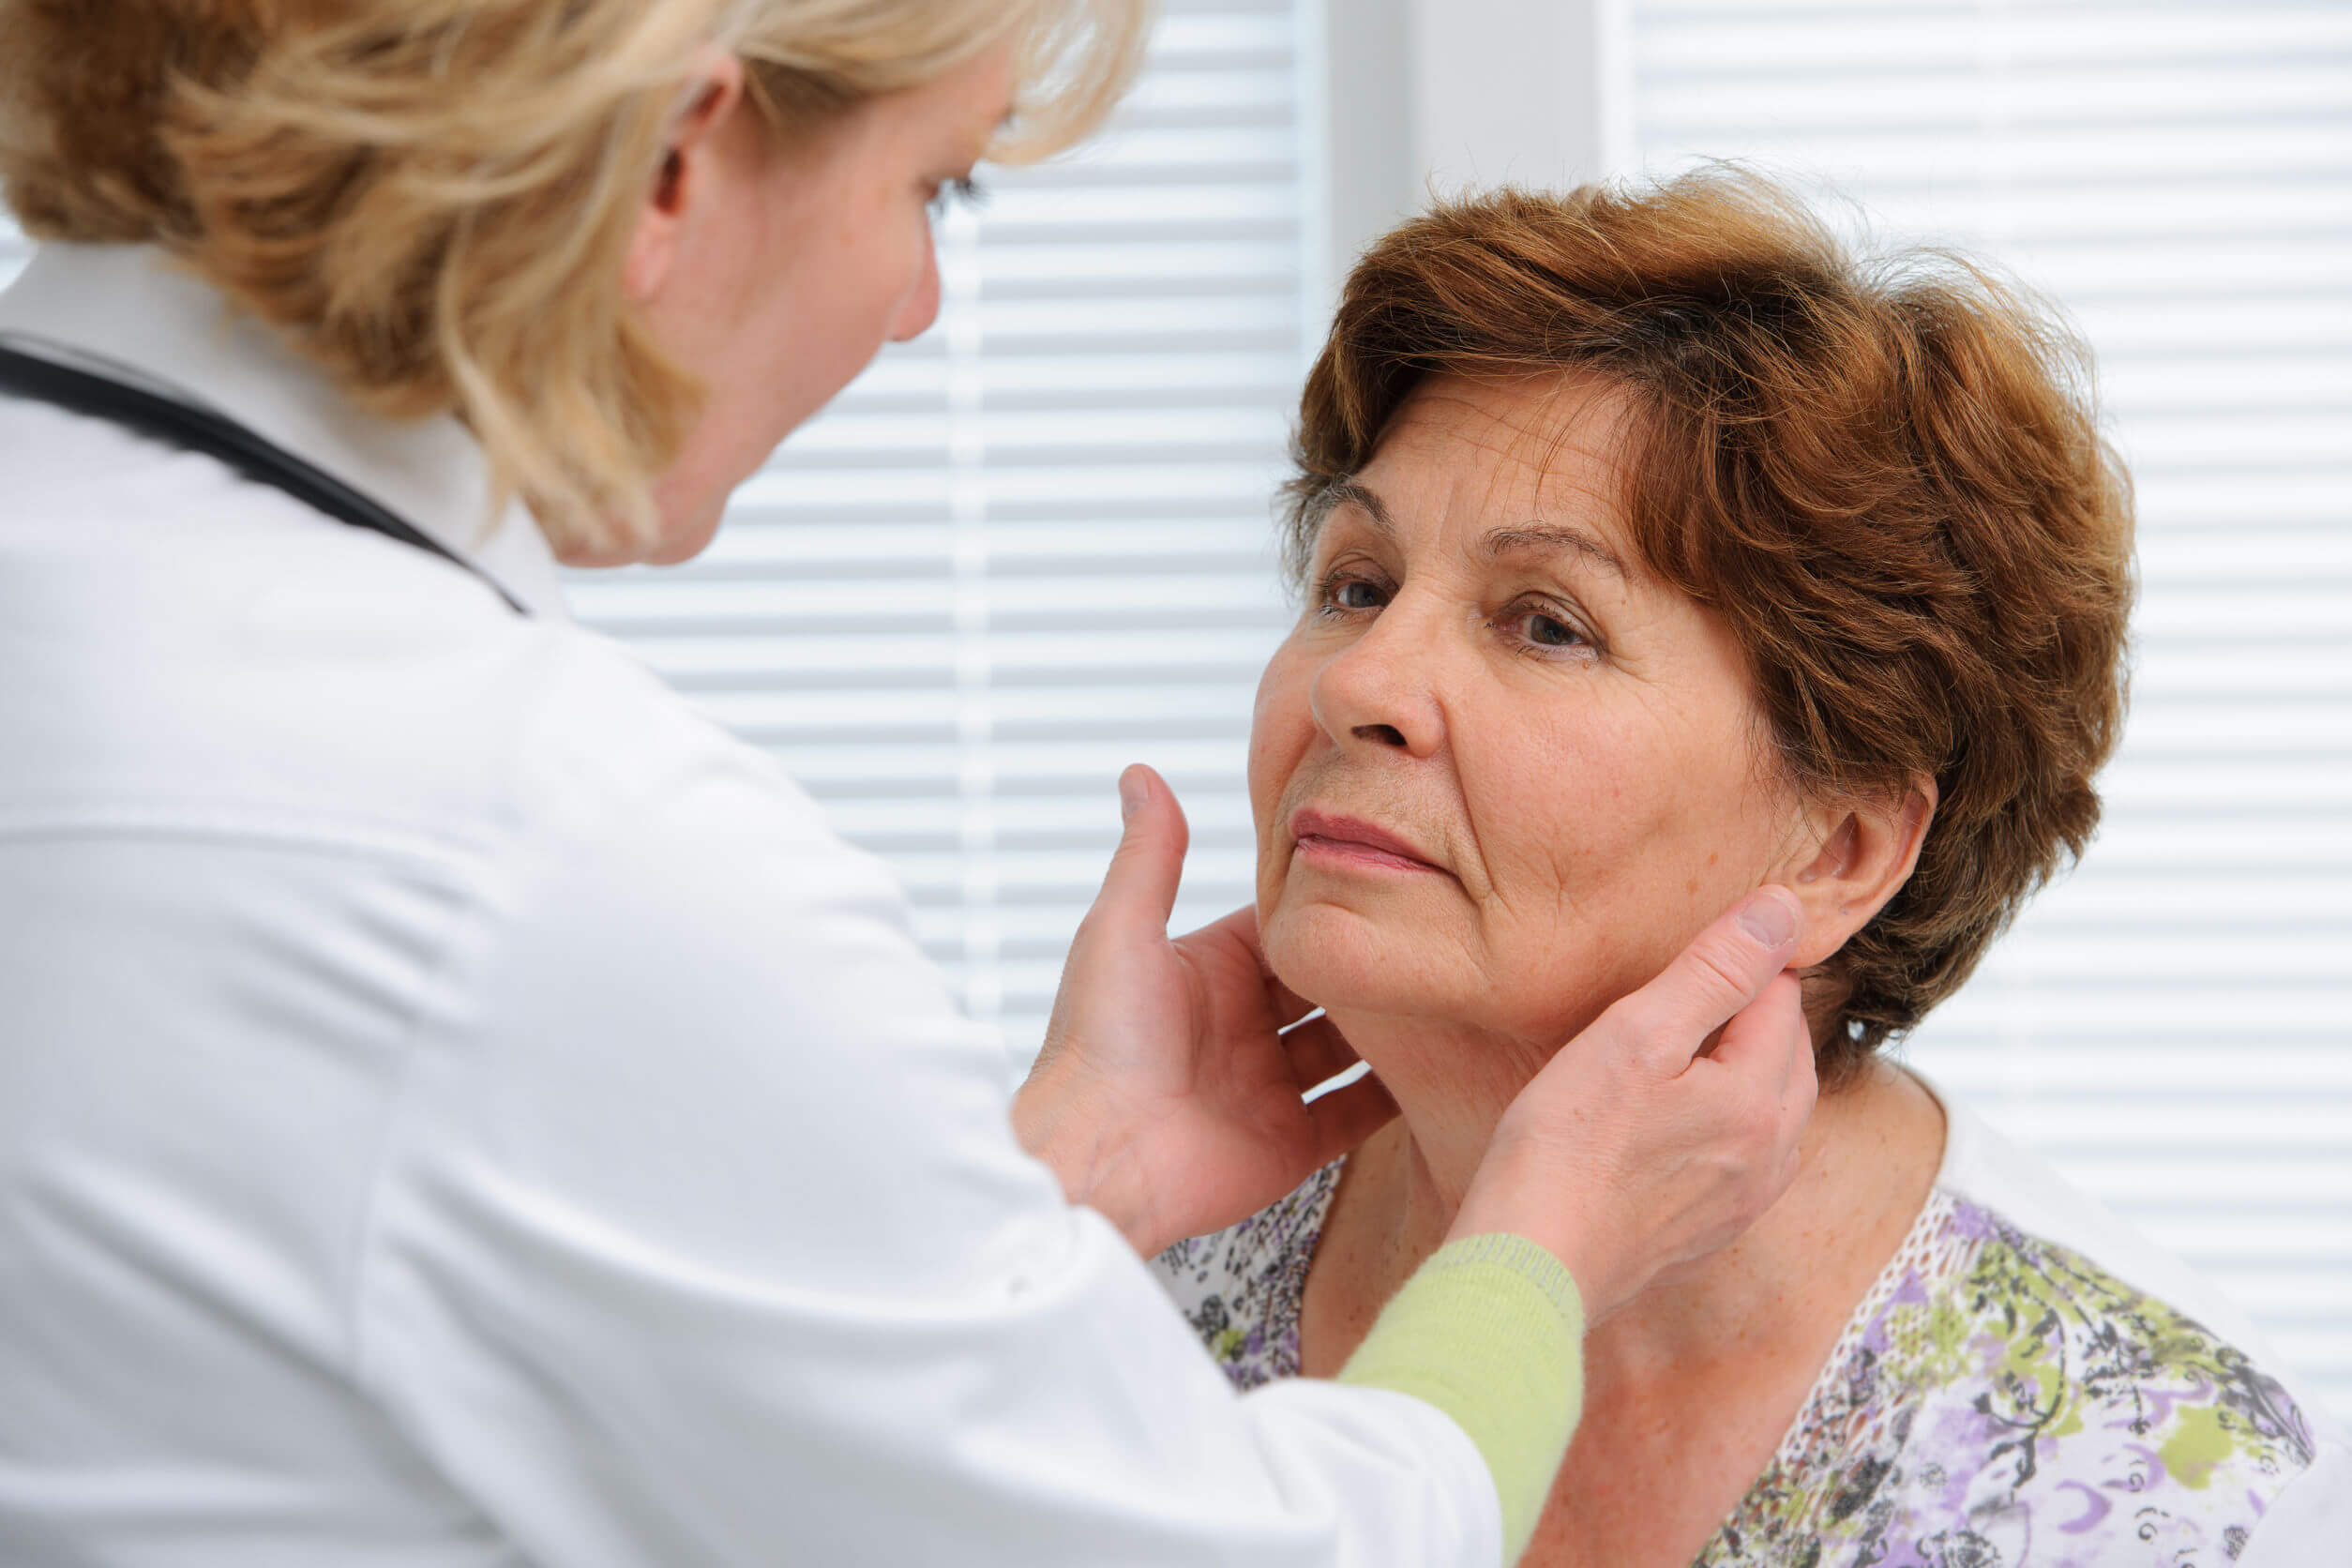 Clinical evaluation of swollen nodes is essential to reach a diagnosis.